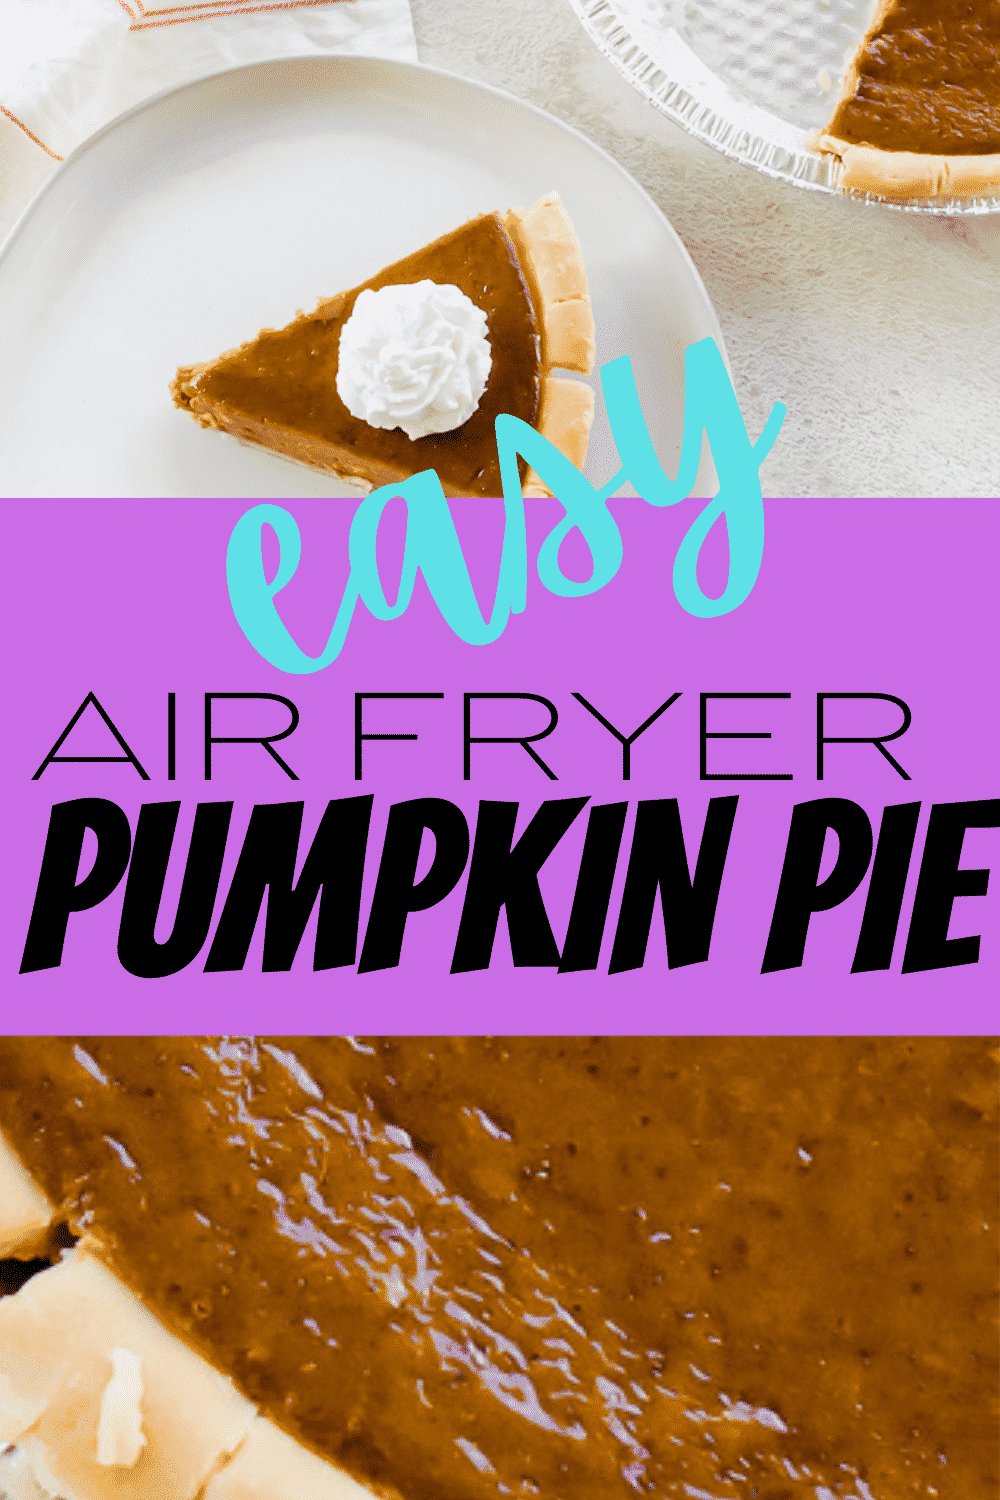 Spicy, sweet, and luscious air fryer pumpkin pie will be the easiest dessert you make this year. Skip the oven and bake a pumpkin pie in the air fryer instead. #pumpkinpie #airfryerpumpkinpie via @vegetarianmamma